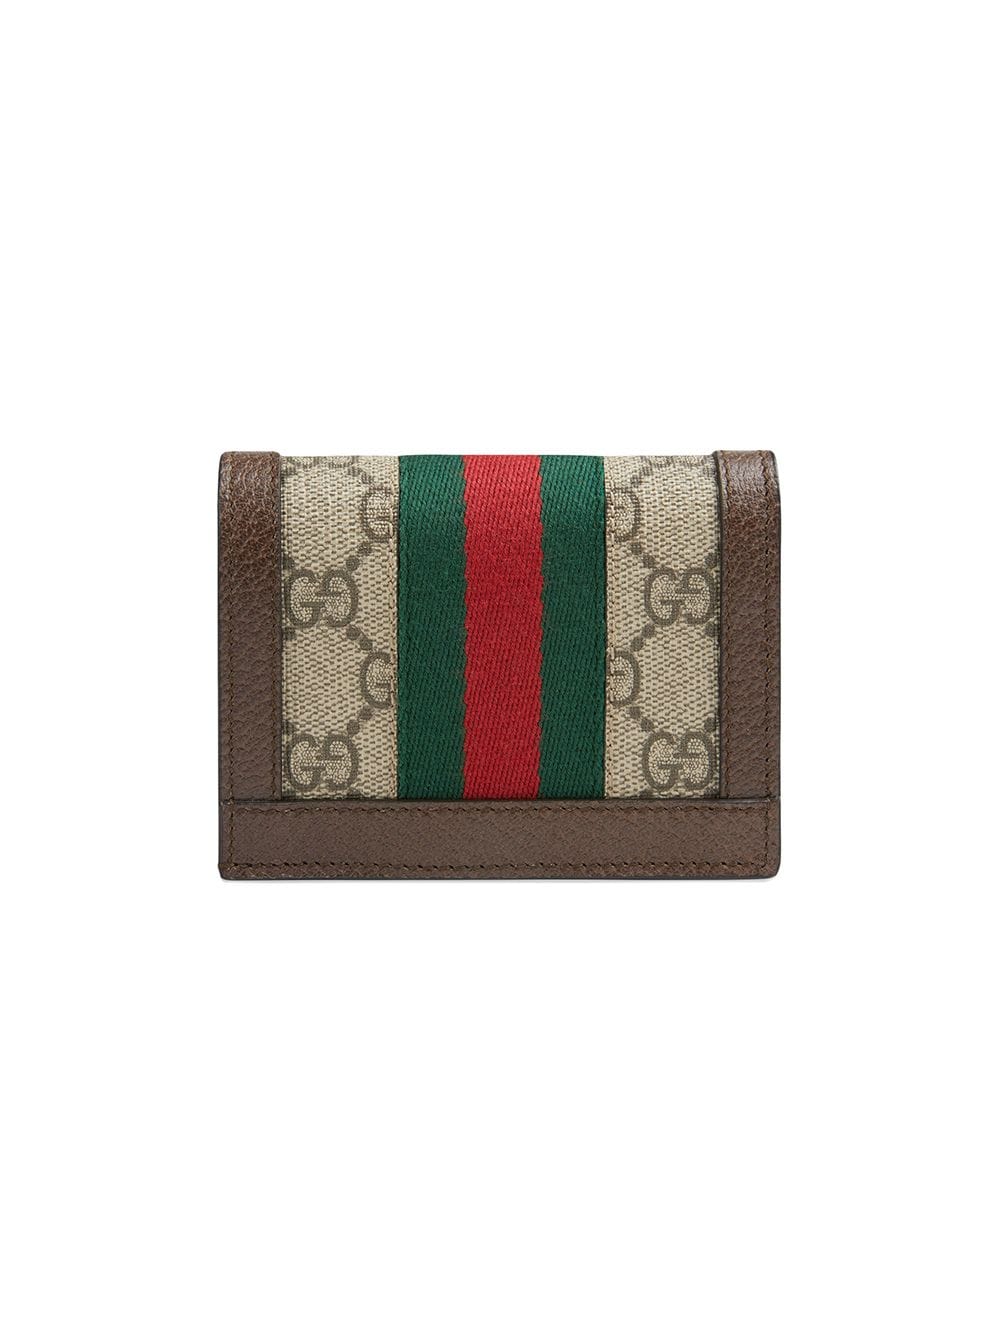 GUCCI OPHIDIA GG SUPREME FABRIC WALLET